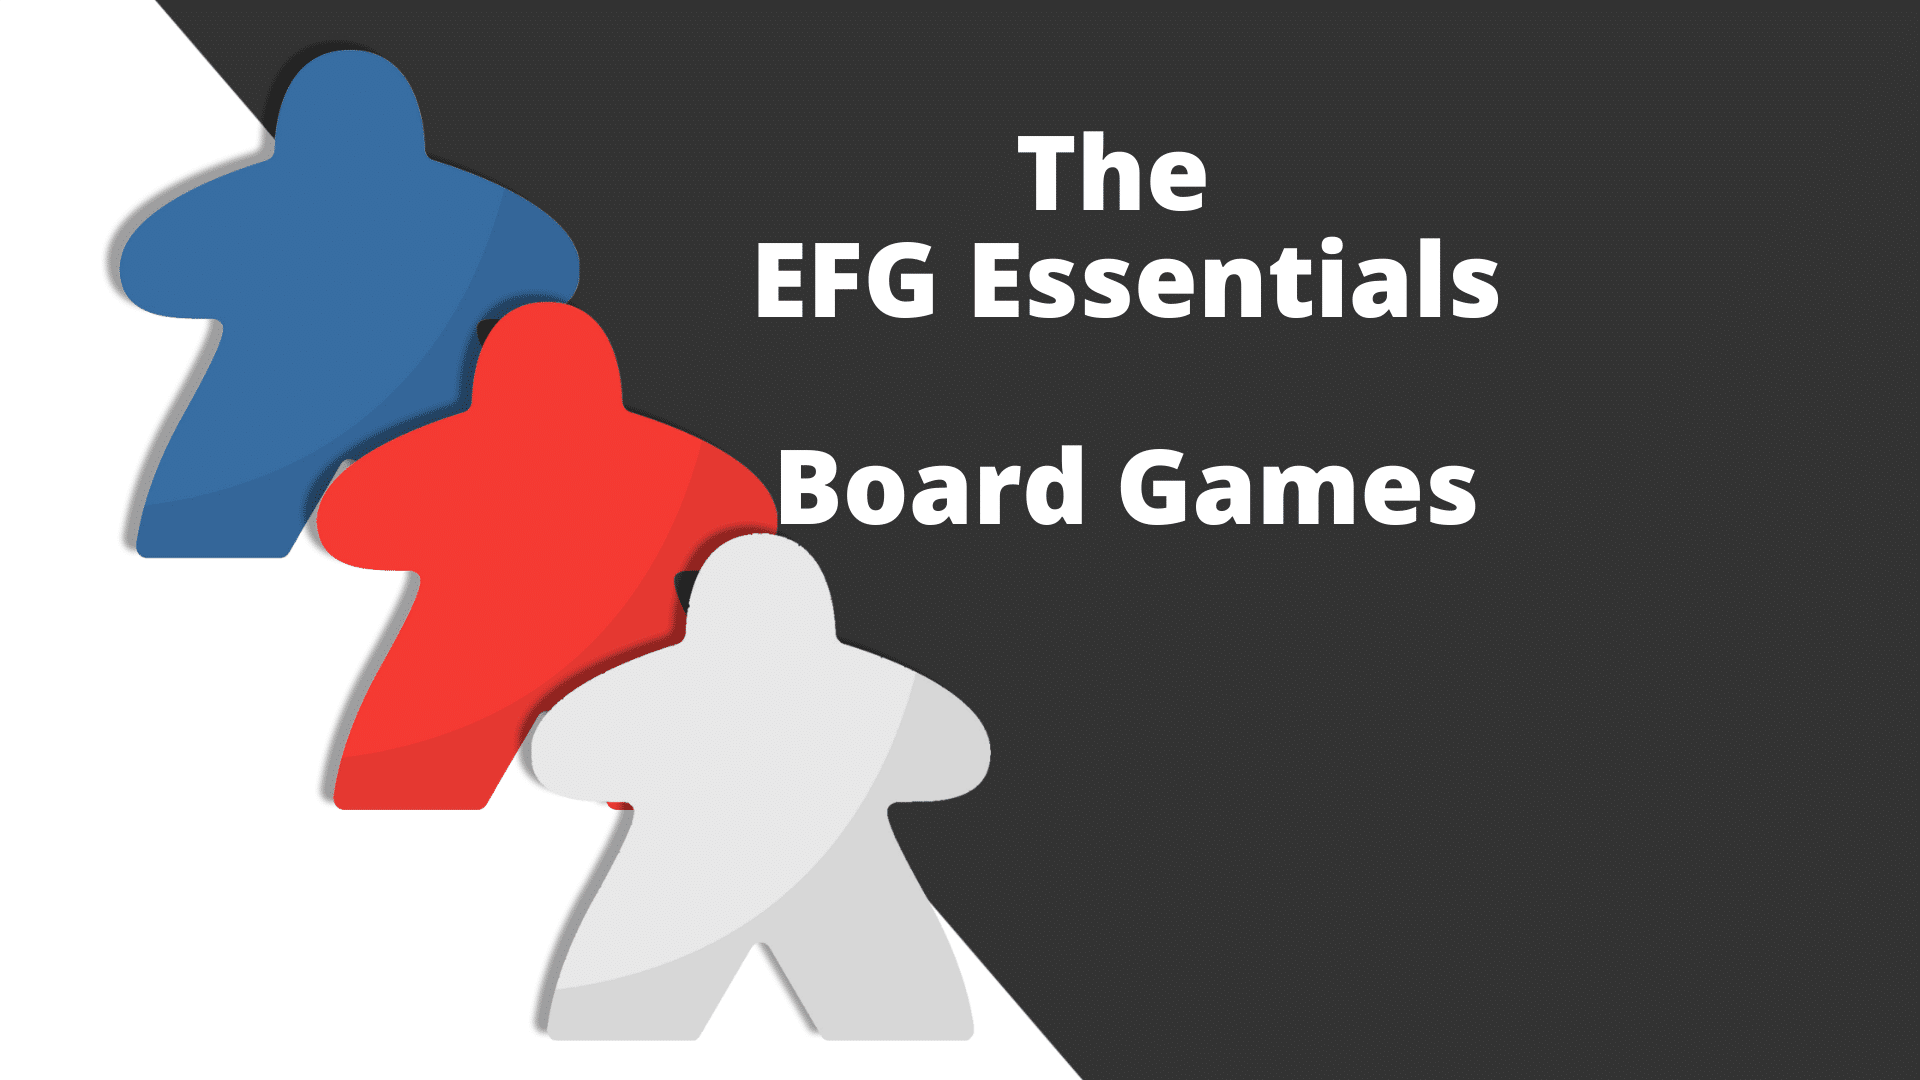 A rectangular image with a stylized image of three meeples on the left and the words The EFG Essentials - Board games on the right